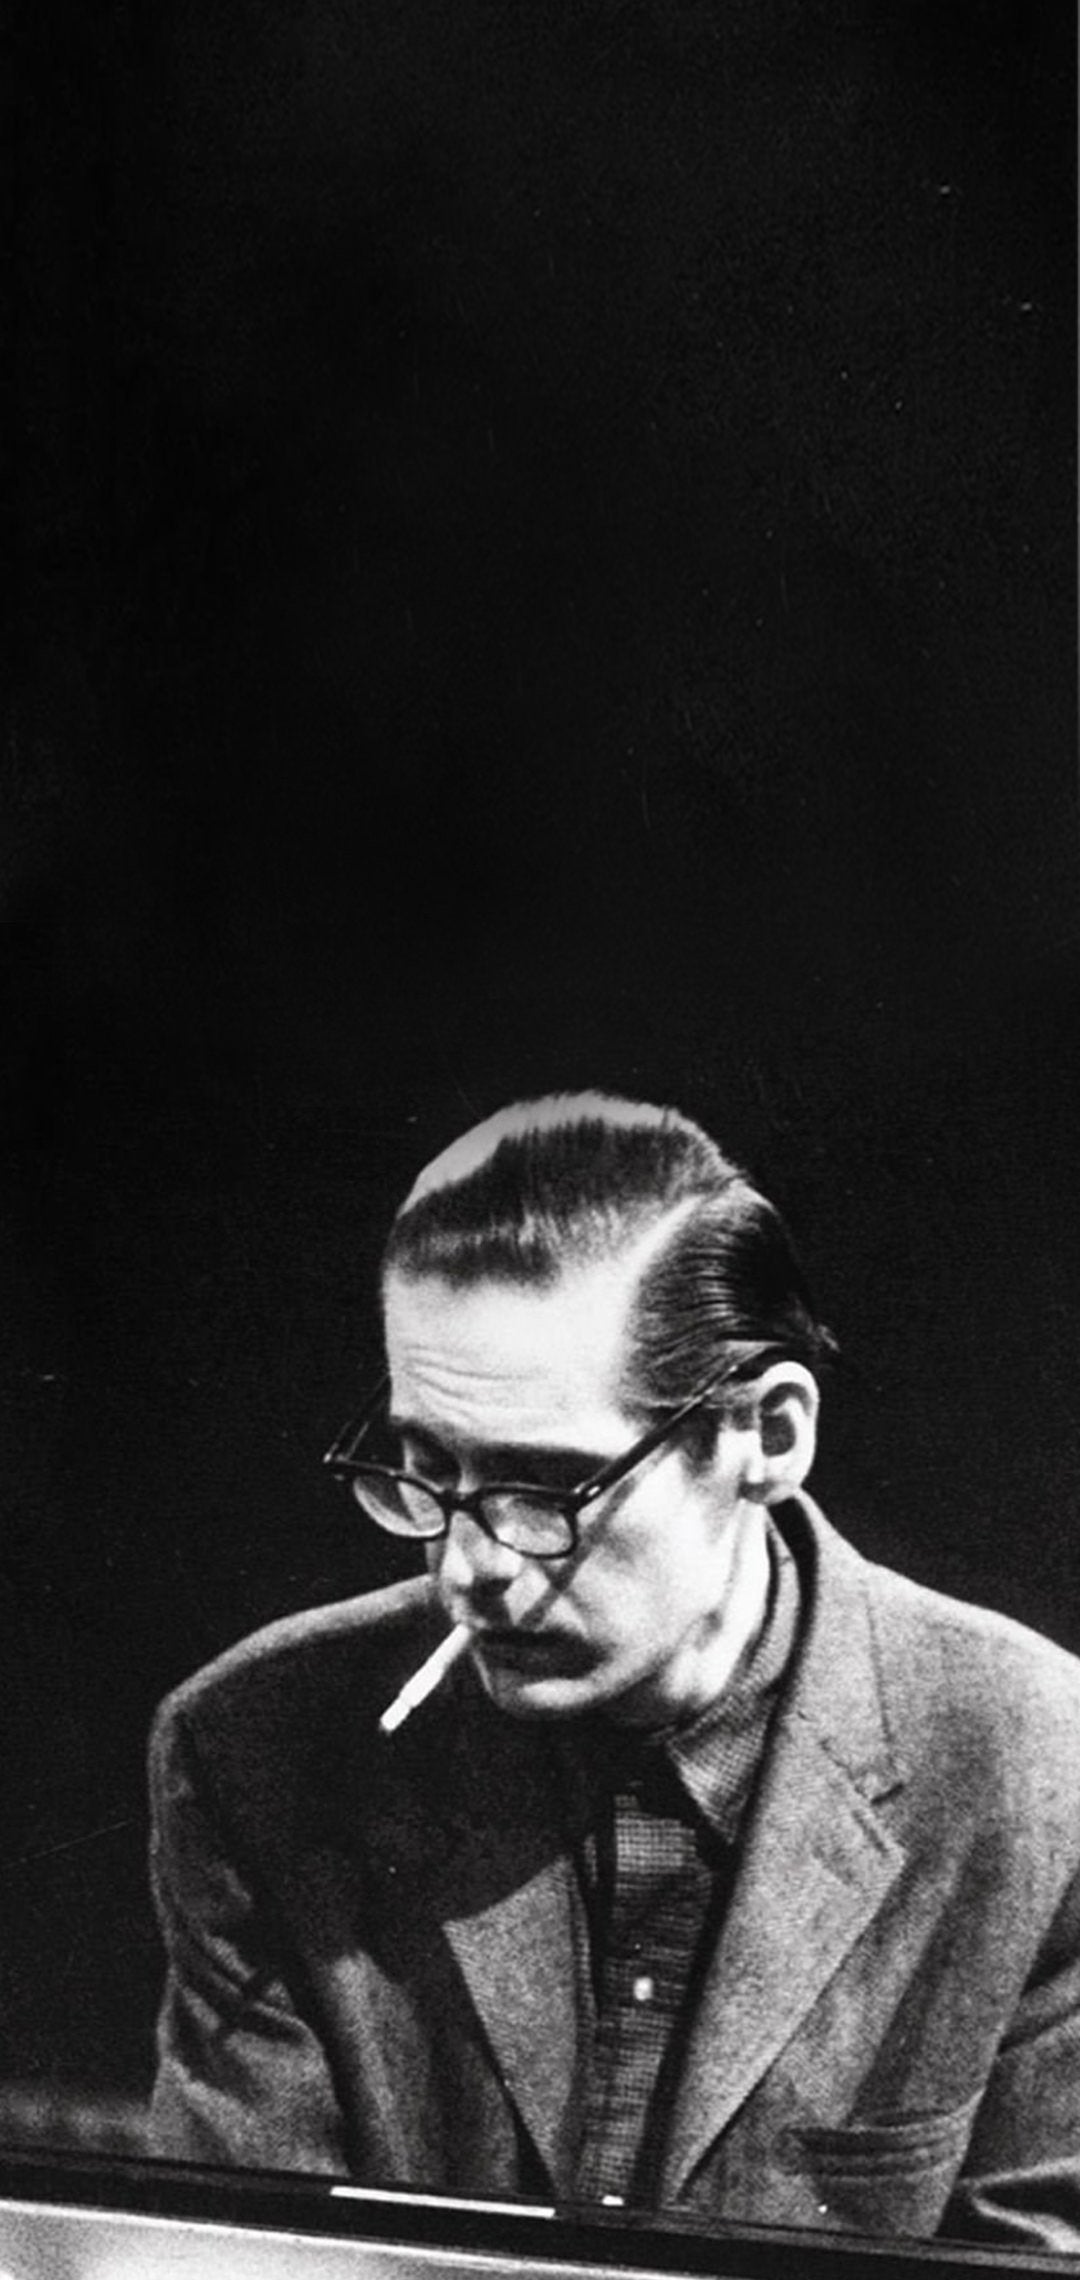 I turned this snazzy pic of Bill Evans into a mobile wallpaper, i might make more if you people are interested!